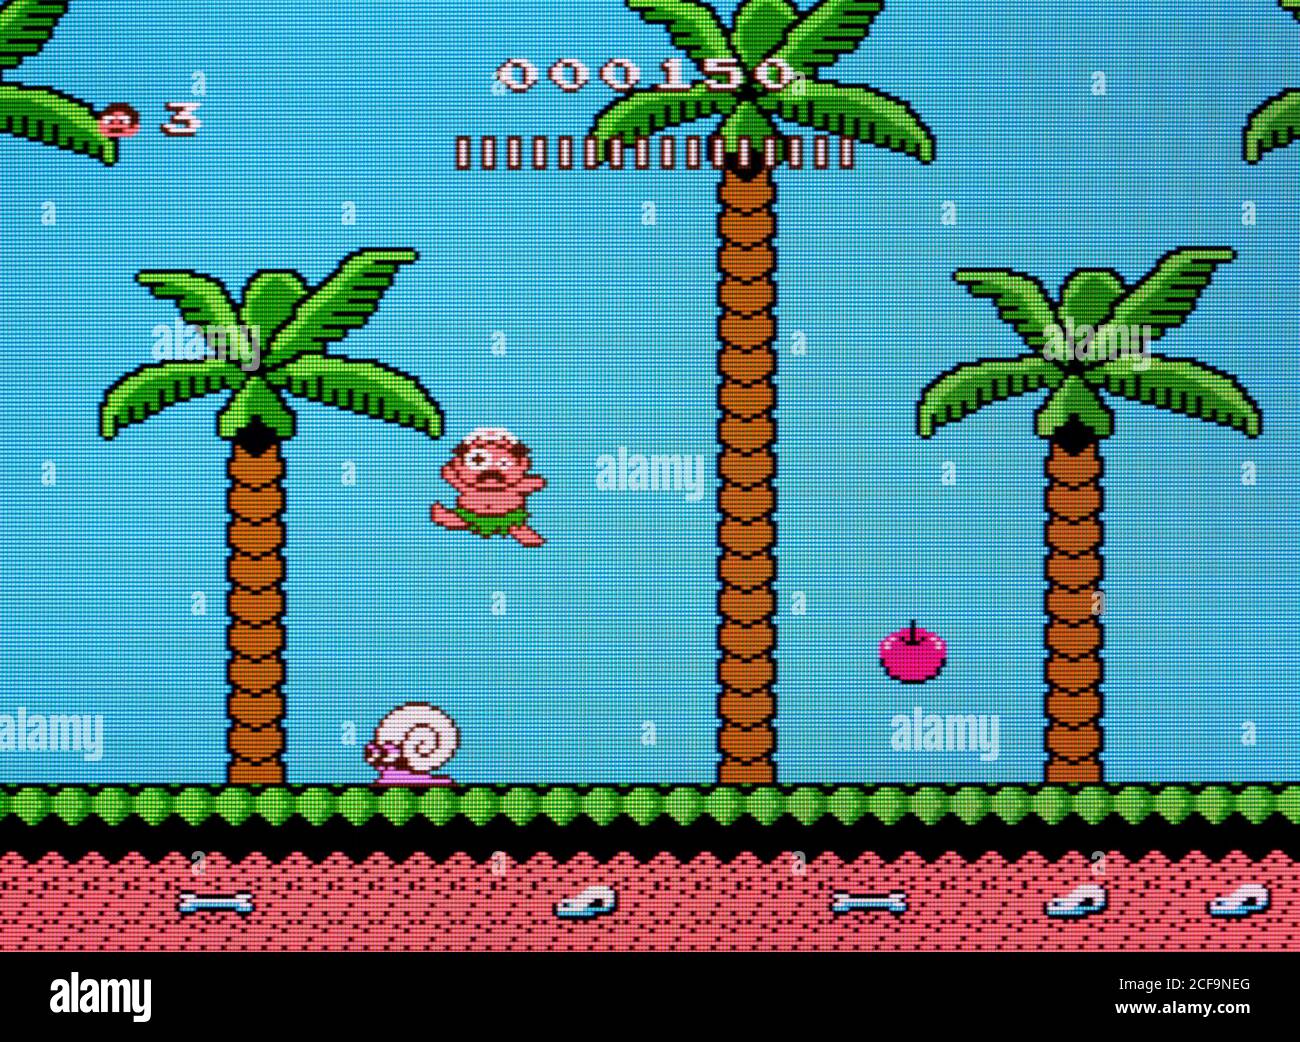 Hudson's Adventure Island II 2 - Nintendo Entertainment System - NES  Videogame - Editorial use only Stock Photo - Alamy